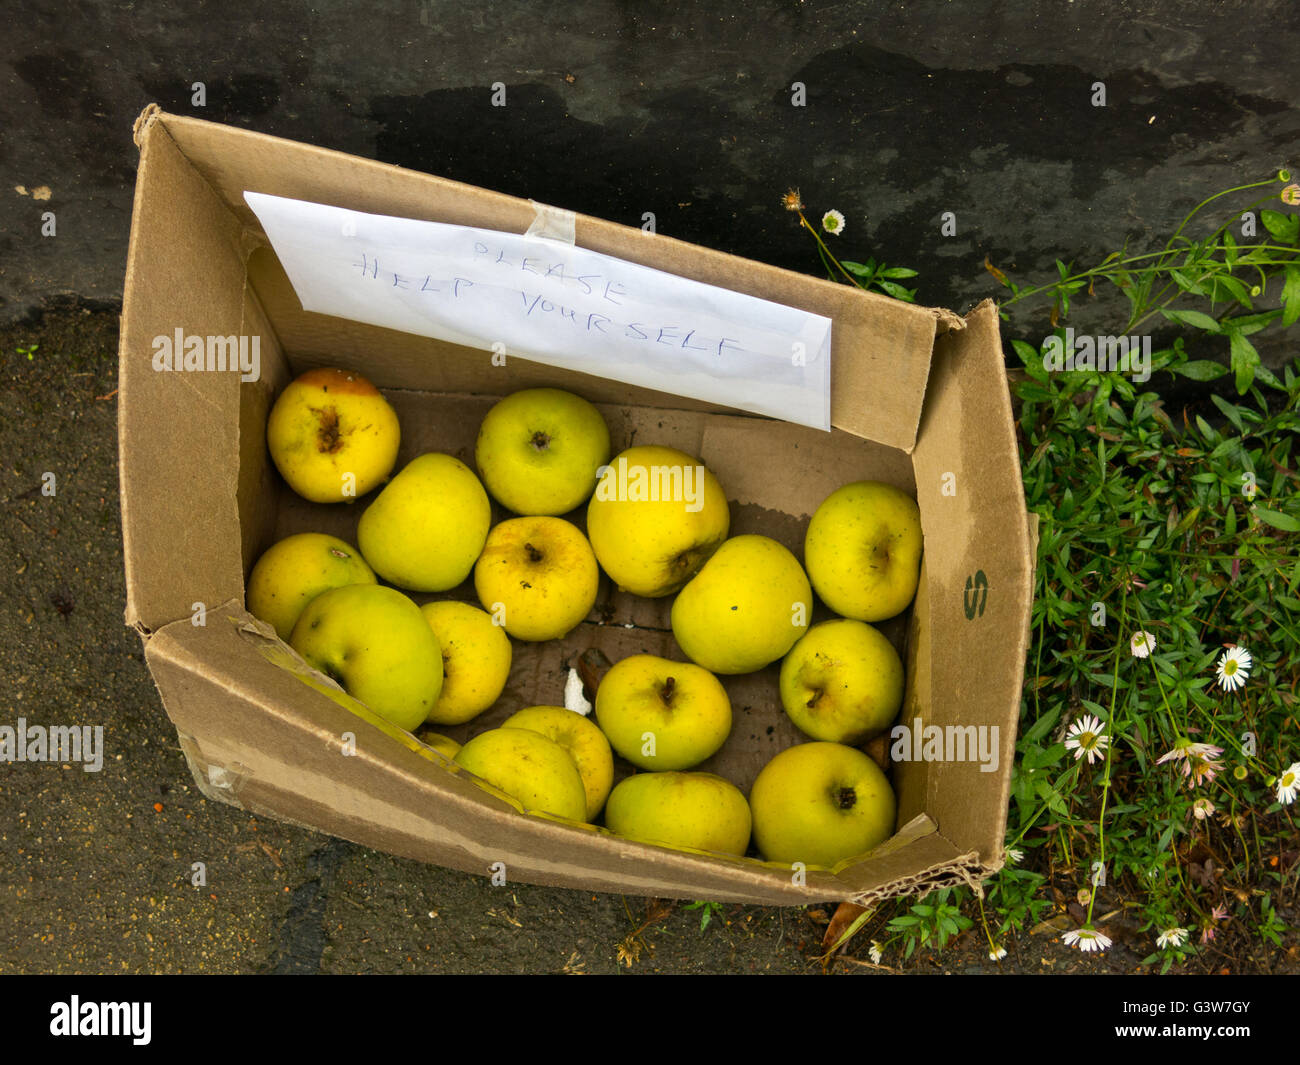 Box of home grown apples left out on a village street for people to help themselves. Stock Photo